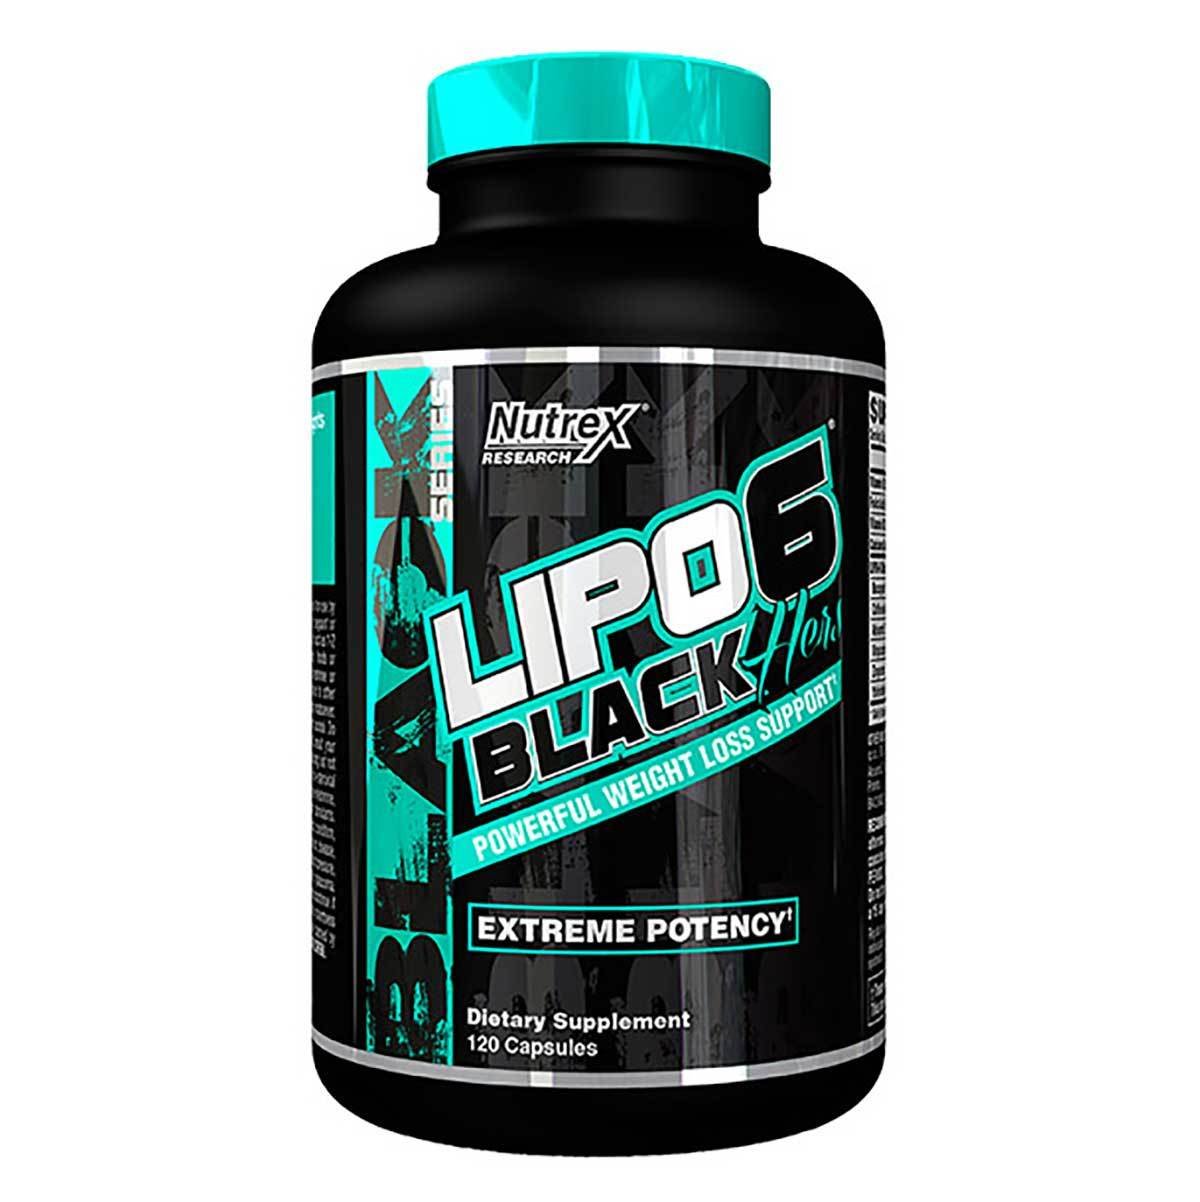 Image of Nutrex Research Lipo 6 Black Hers 120 Capsules